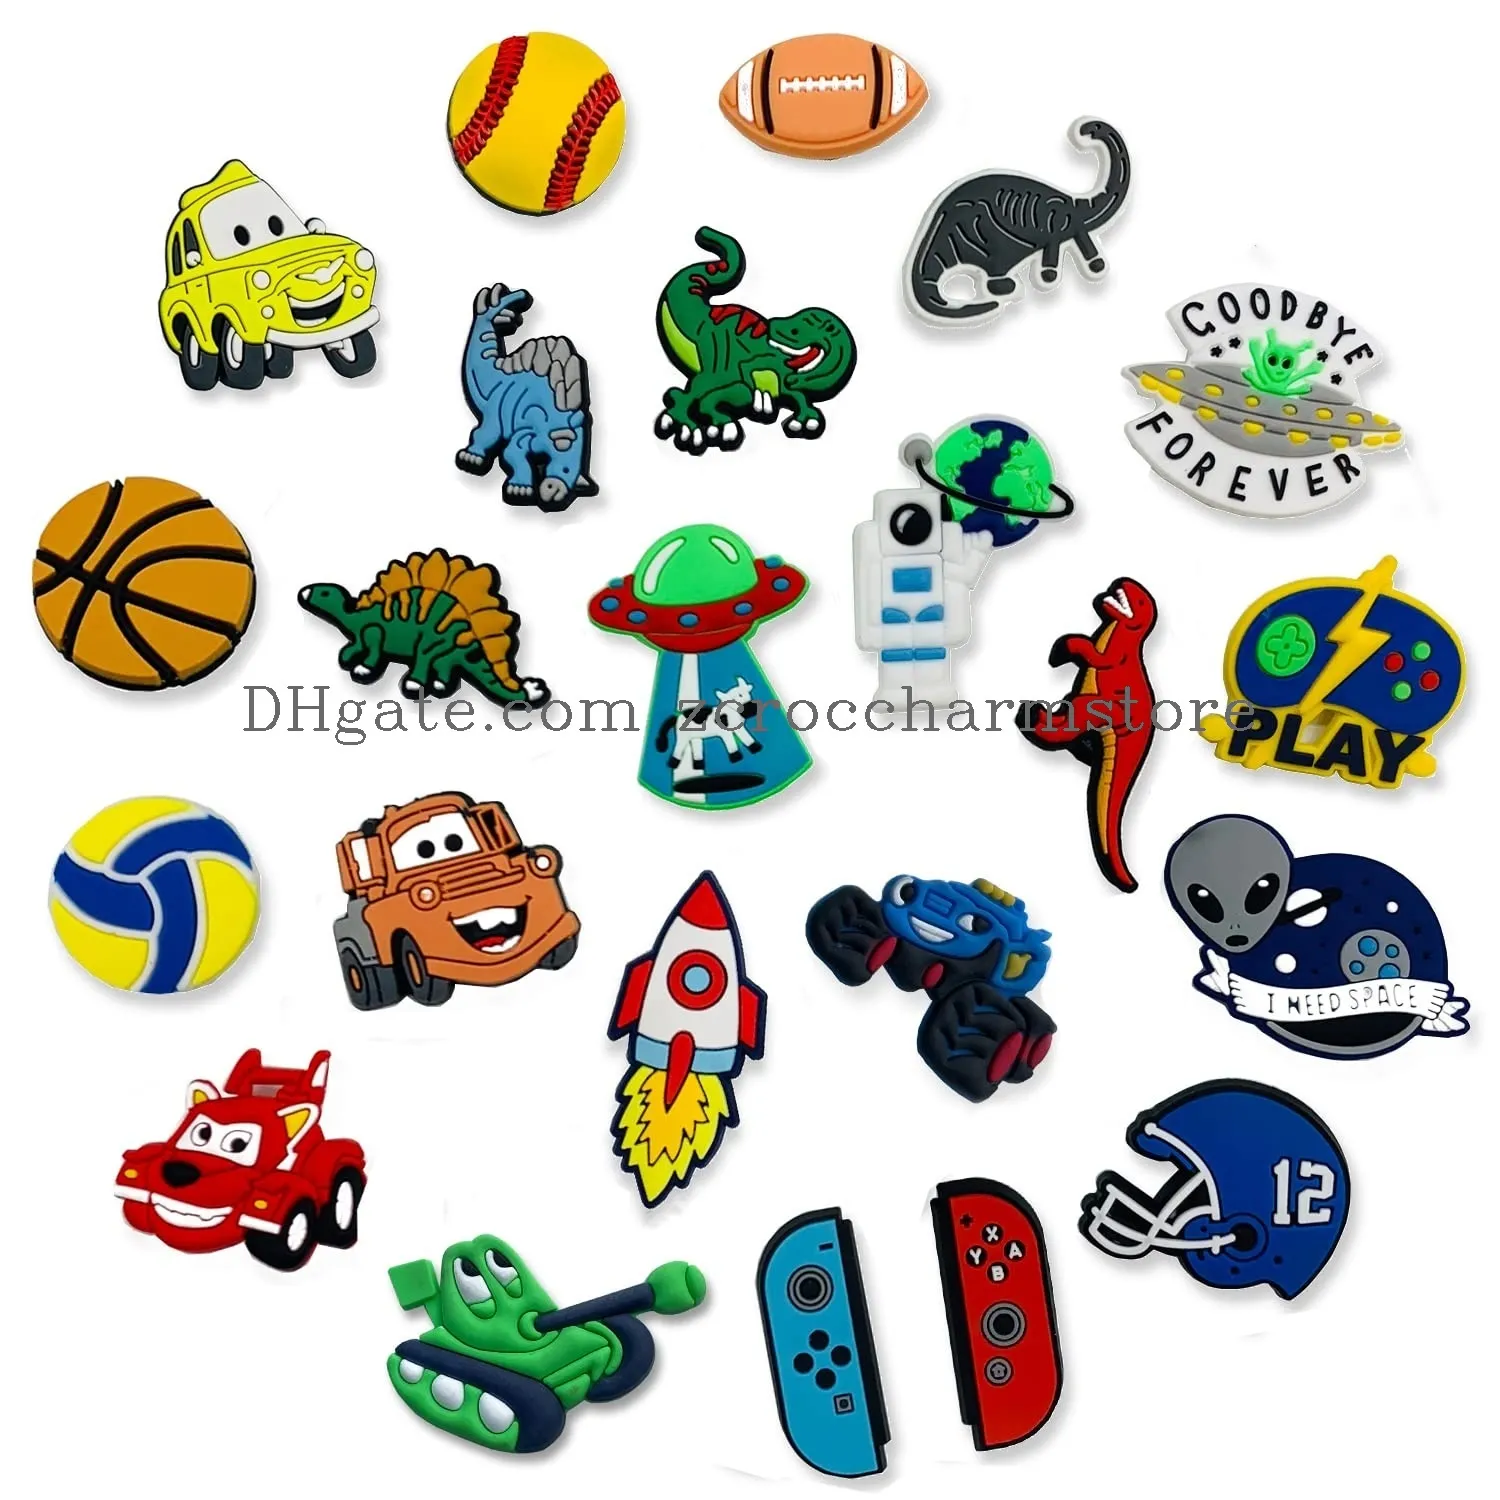 clog charms for boys sports gibits basketball and football baseball softball soccer with sneakers pvc charms for clog cute dinosaur shoe charms for bracelet boys clog gibits for kids teens gifts